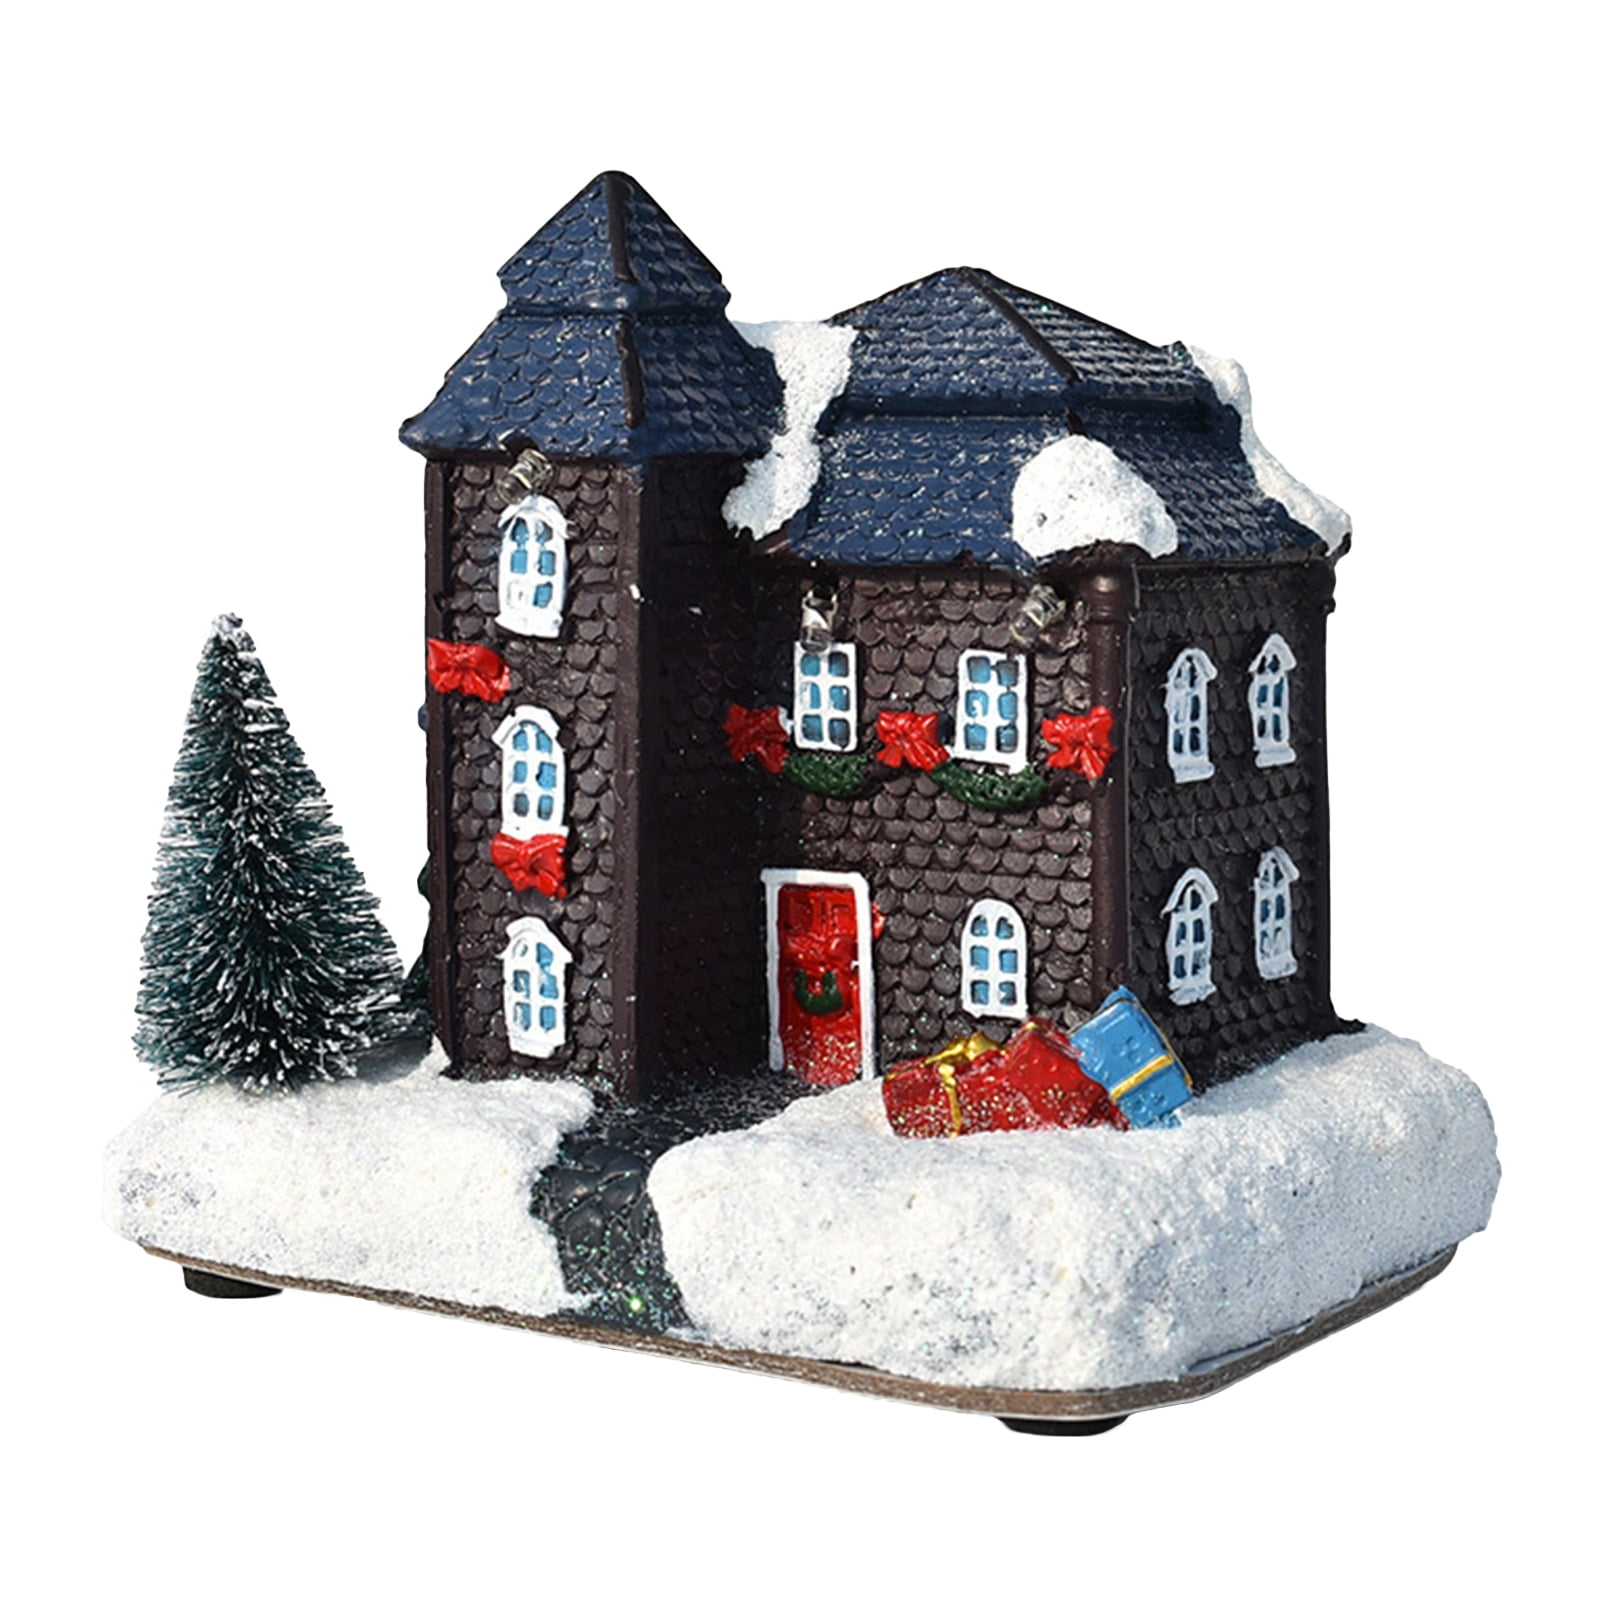 Details about   Snow House Display Mold Home Christmas Decor Luminous LED Light Ornament 